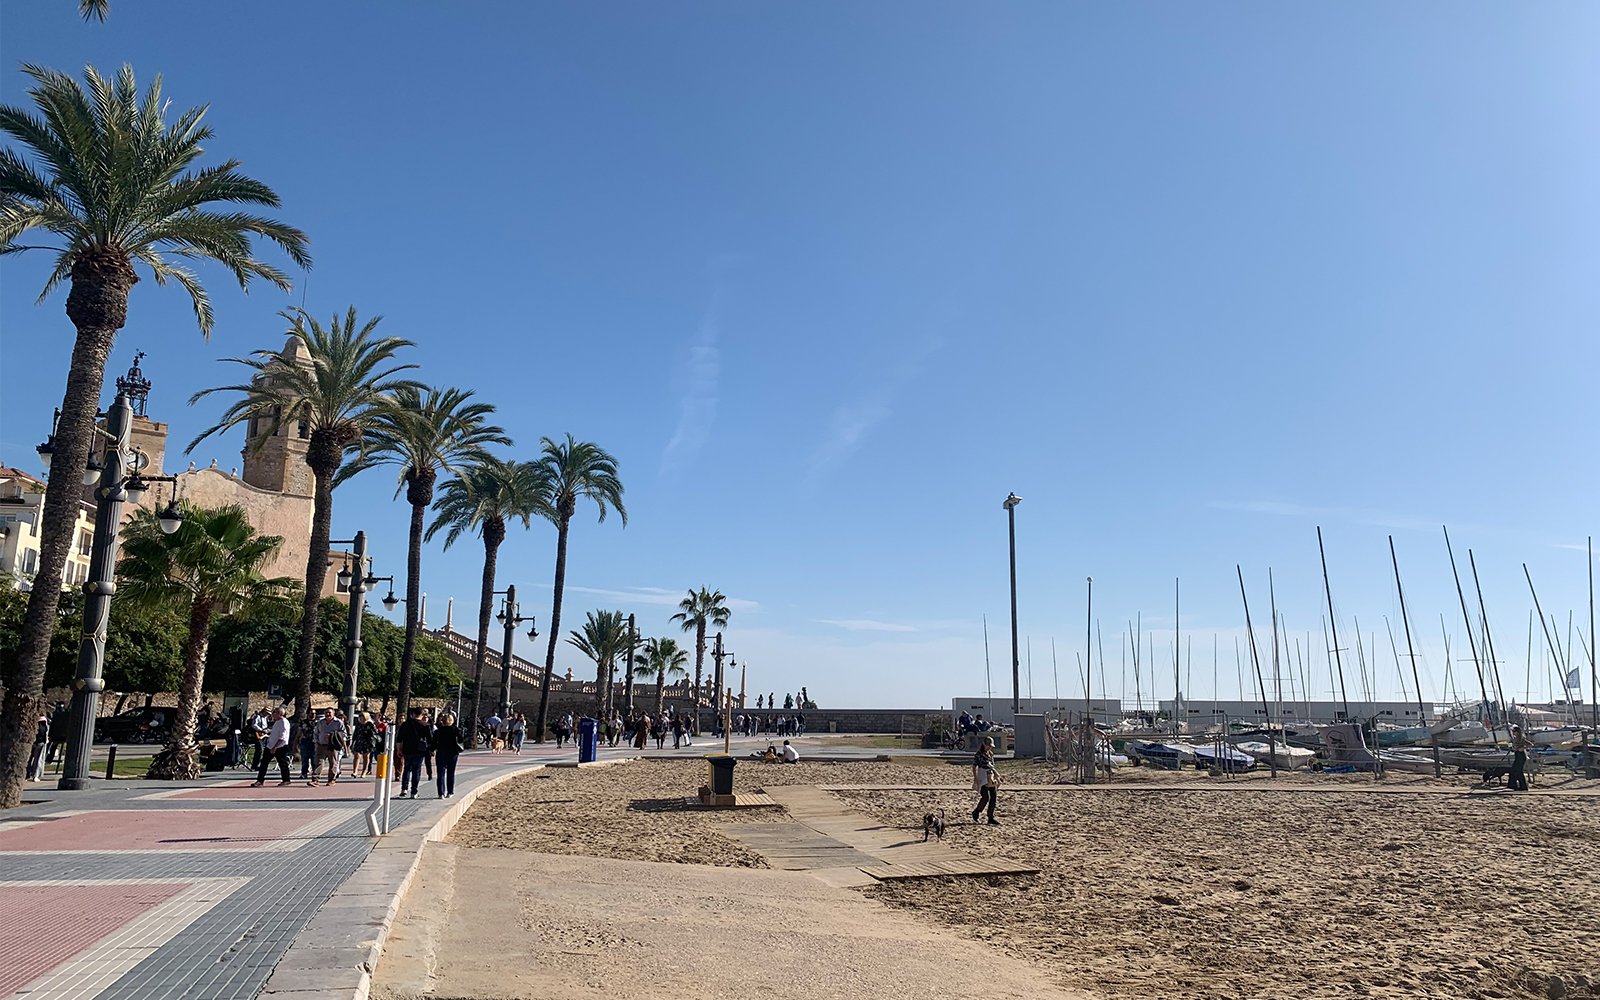 People walking down path with palm trees and buildings on left and sand and boats on right